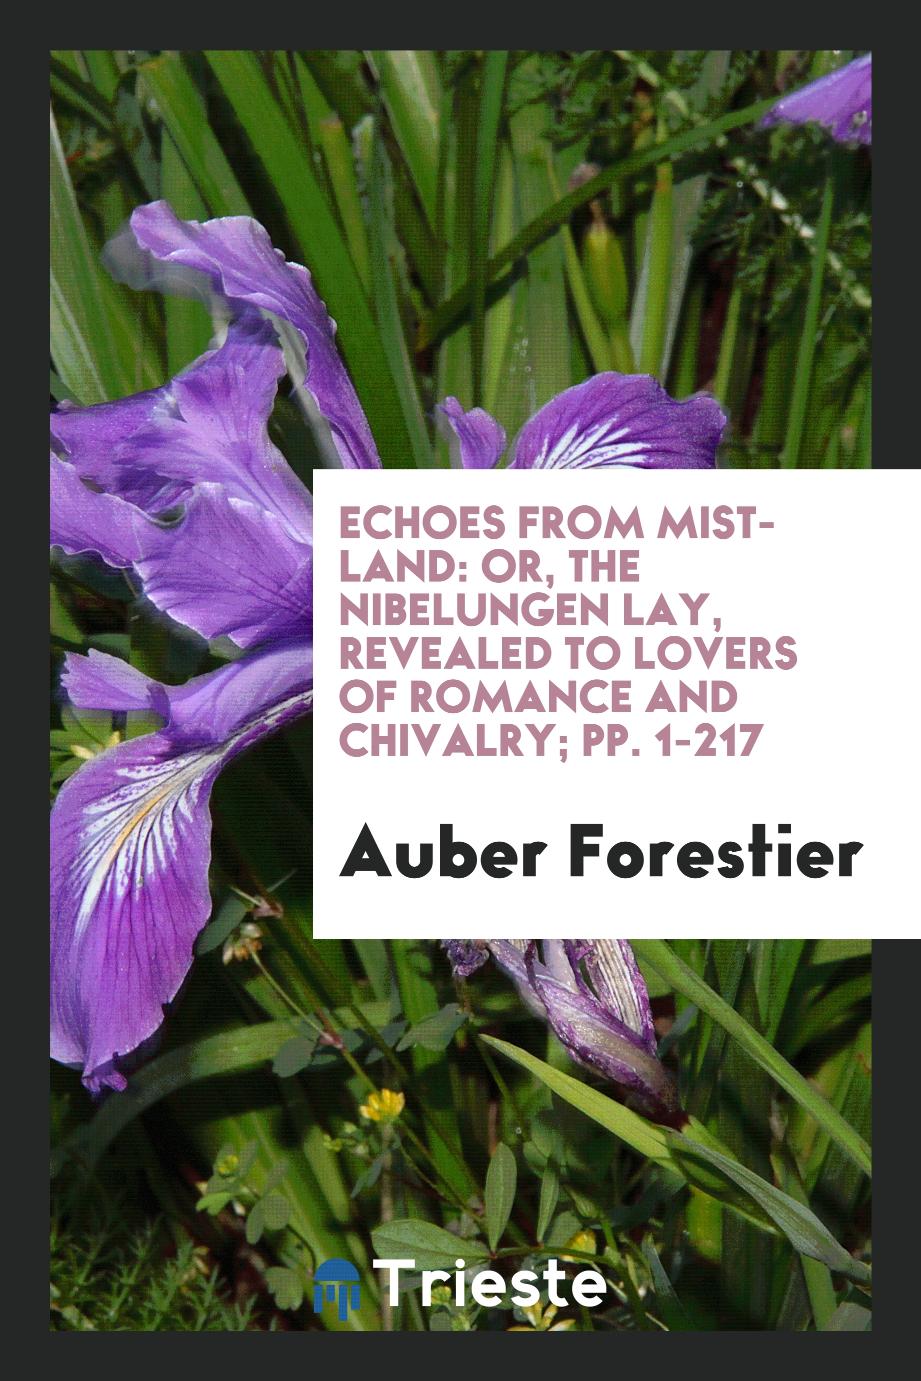 Auber Forestier - Echoes from Mist-Land: Or, The Nibelungen Lay, Revealed to Lovers of Romance and Chivalry; pp. 1-217